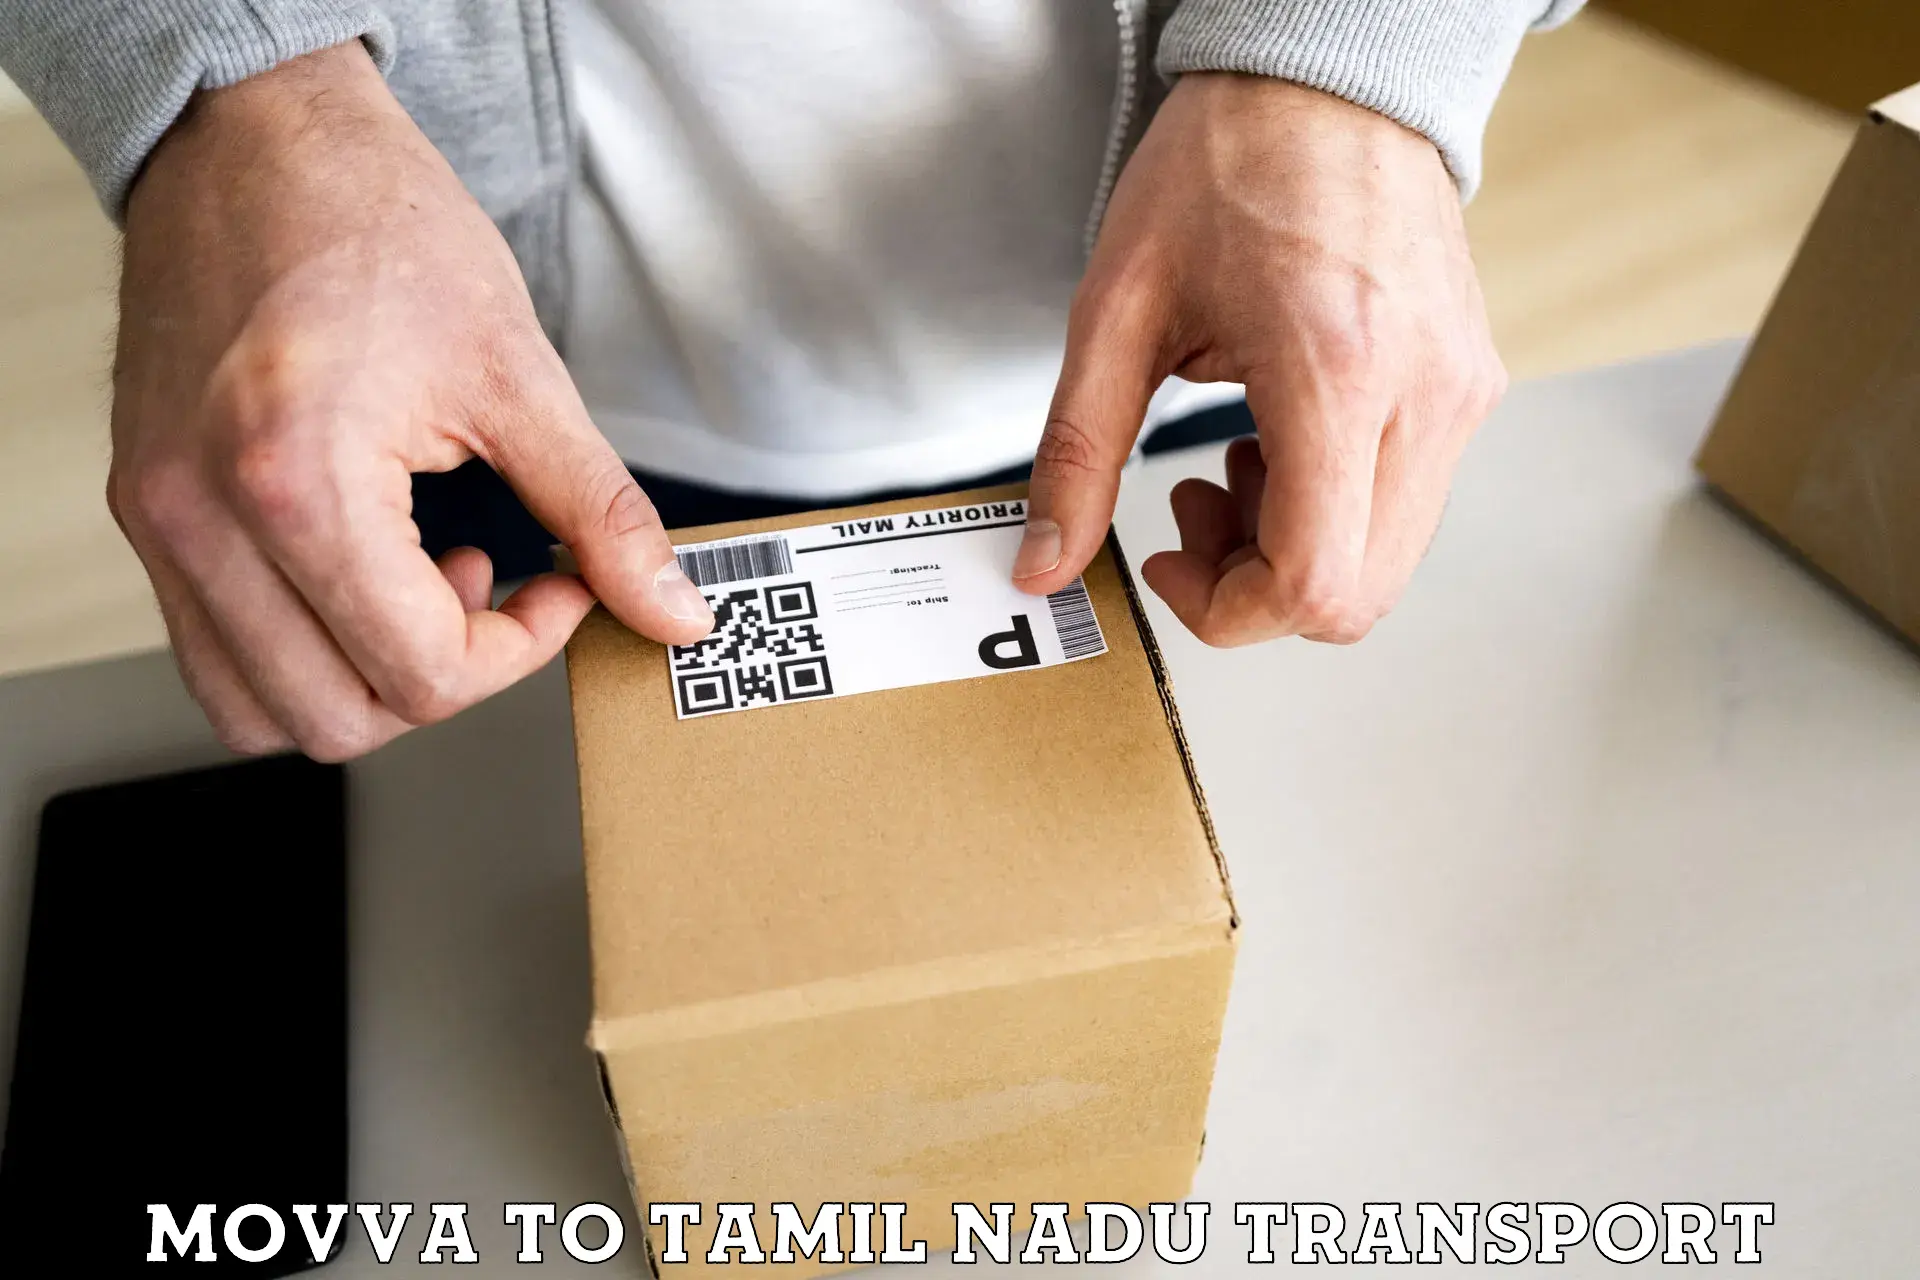 Express transport services Movva to Mettala